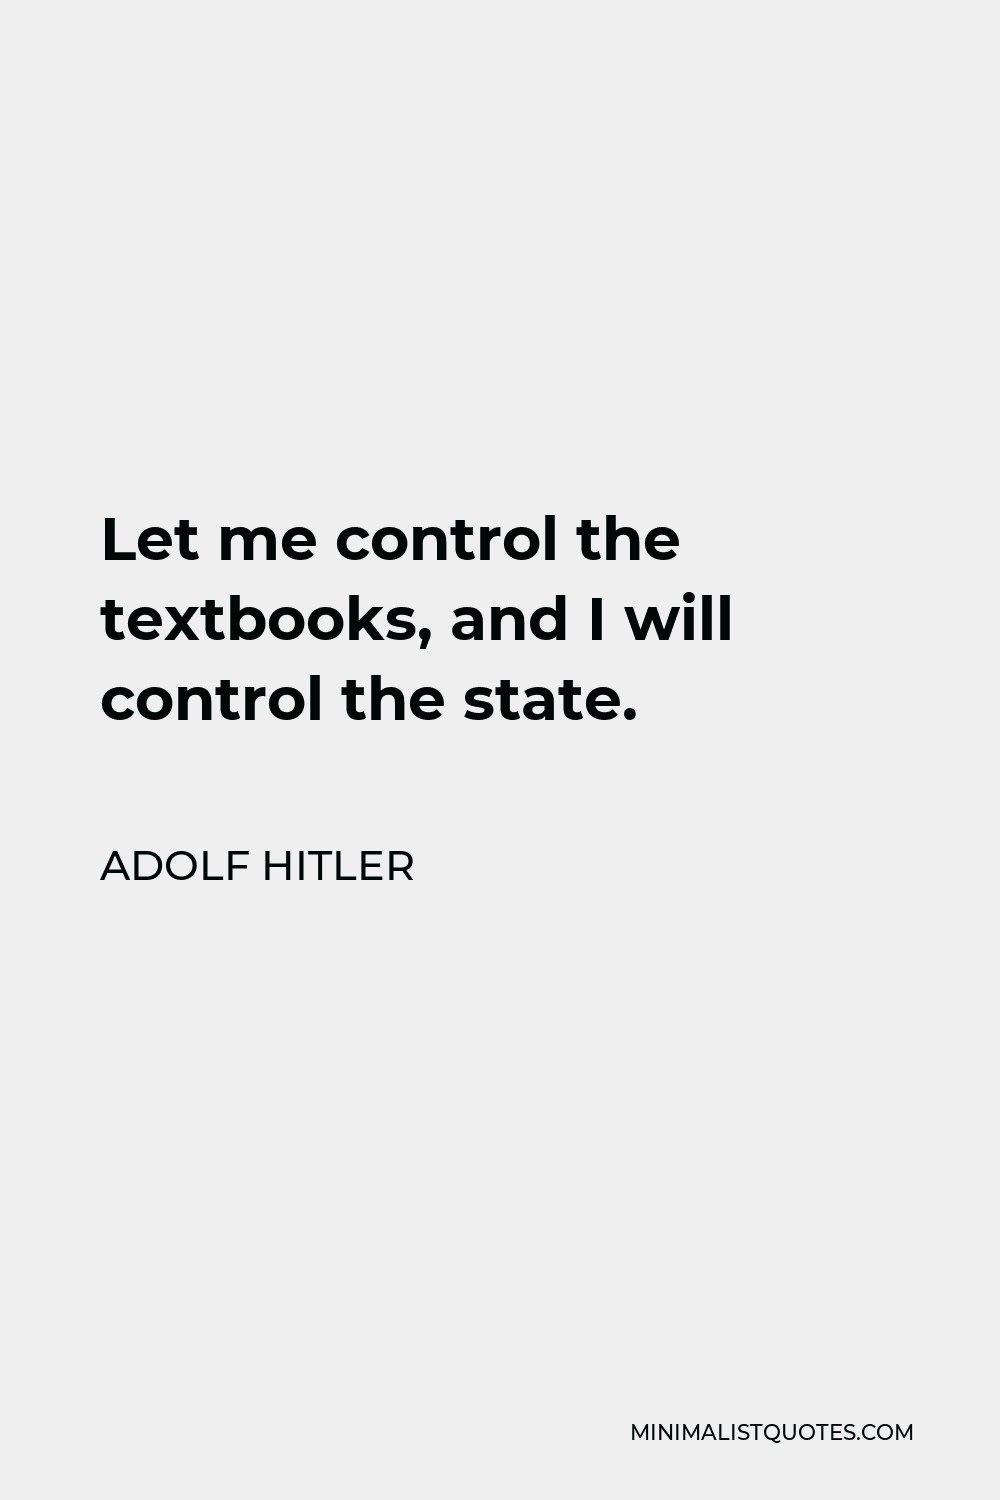 Adolf Hitler Quote - Let me control the textbooks, and I will control the state.